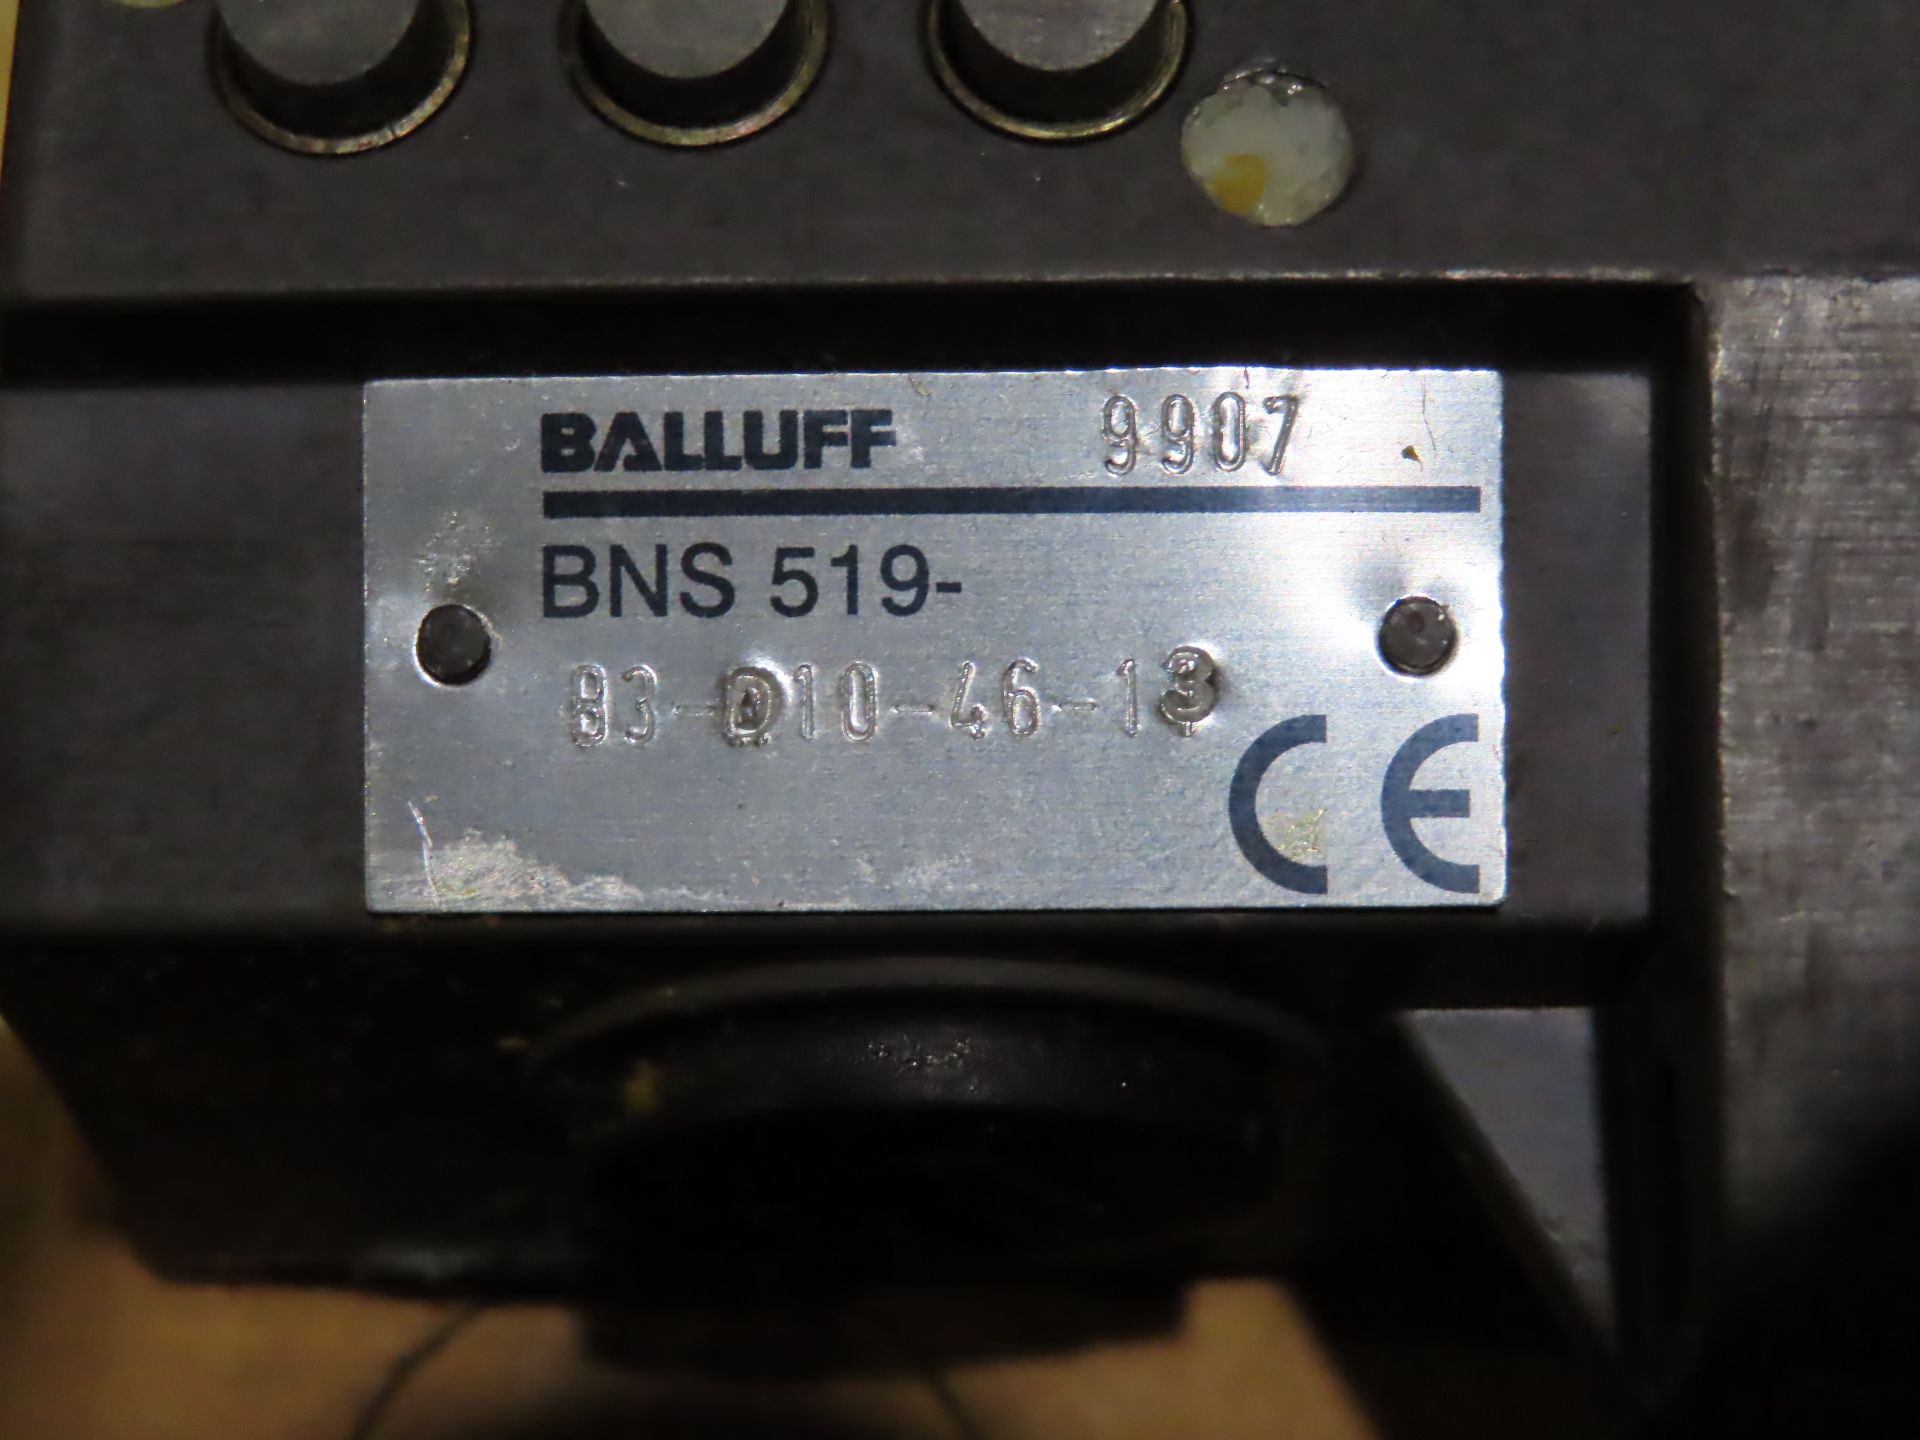 Balluff model BNS-519-B3-D10-46-13, new in box, as always with Brolyn LLC auctions, all lots can - Image 2 of 2